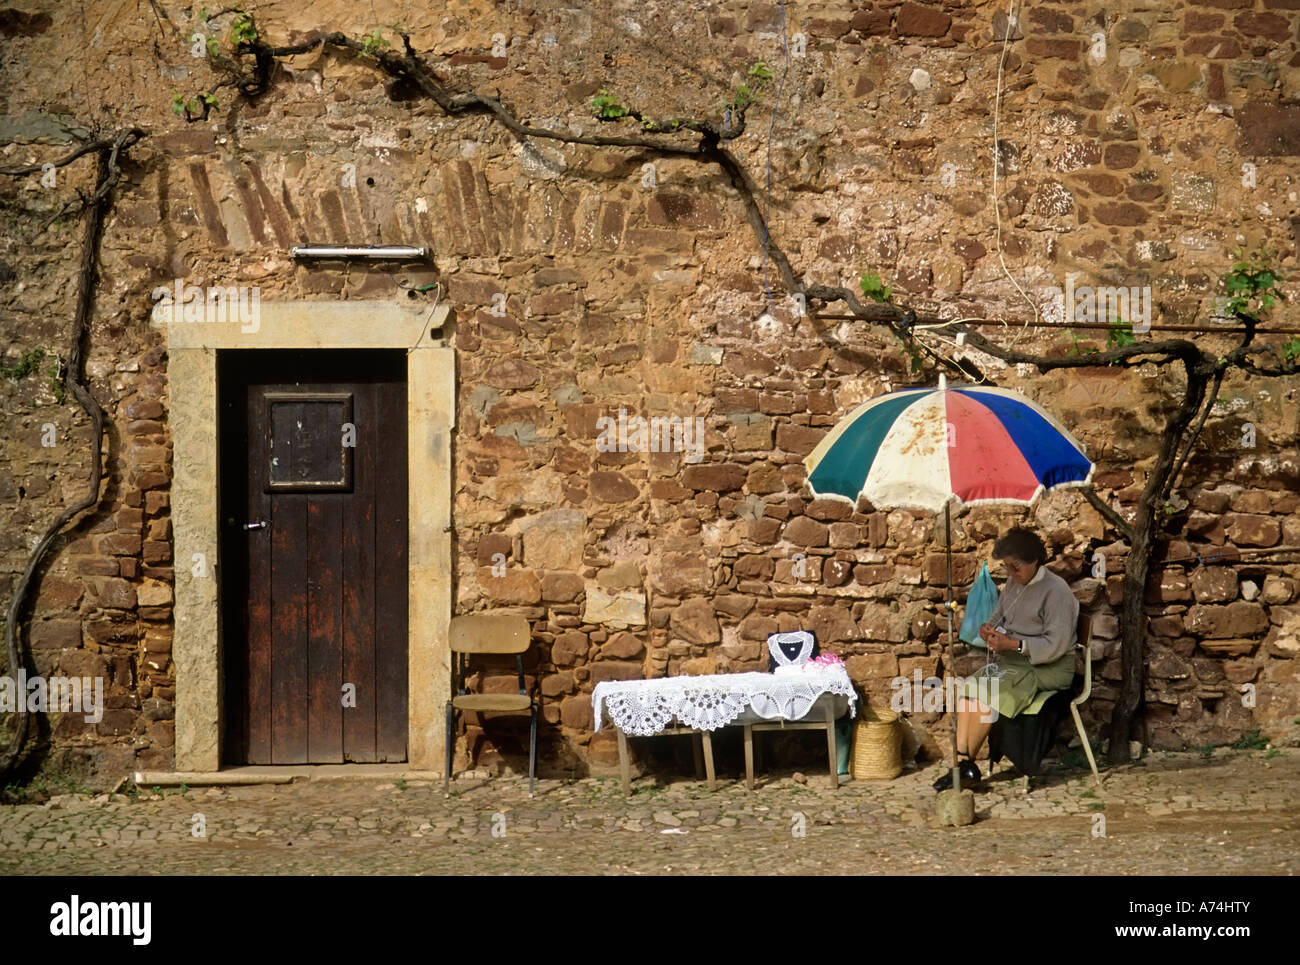 Woman knitting and selling lace in street sitting in shade under umbrella Silves Algarve Portugal Stock Photo